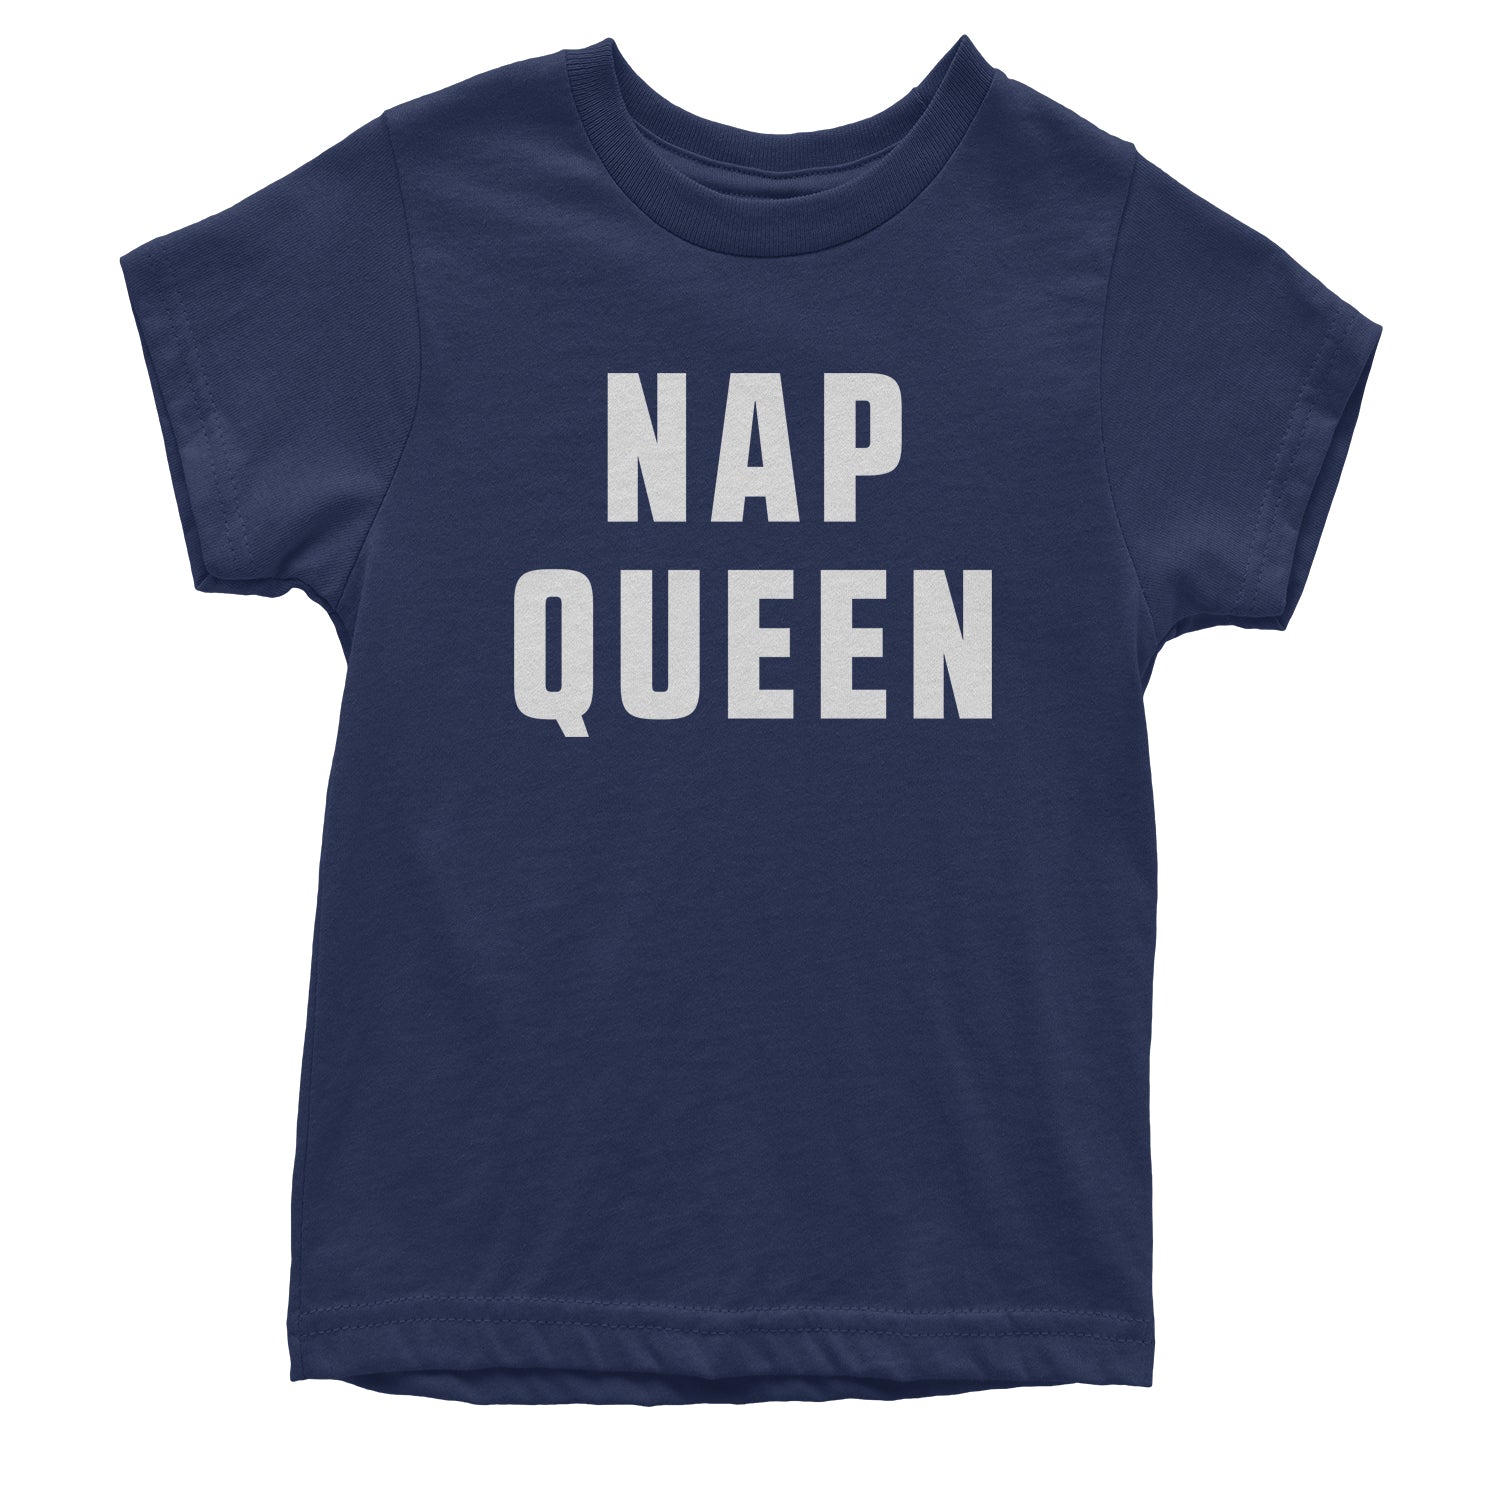 Nap Queen (White Print) Comfy Top For Lazy Days Youth T-shirt all, day, function, lazy, nap, pajamas, queen, siesta, sleep, tired, to, too by Expression Tees